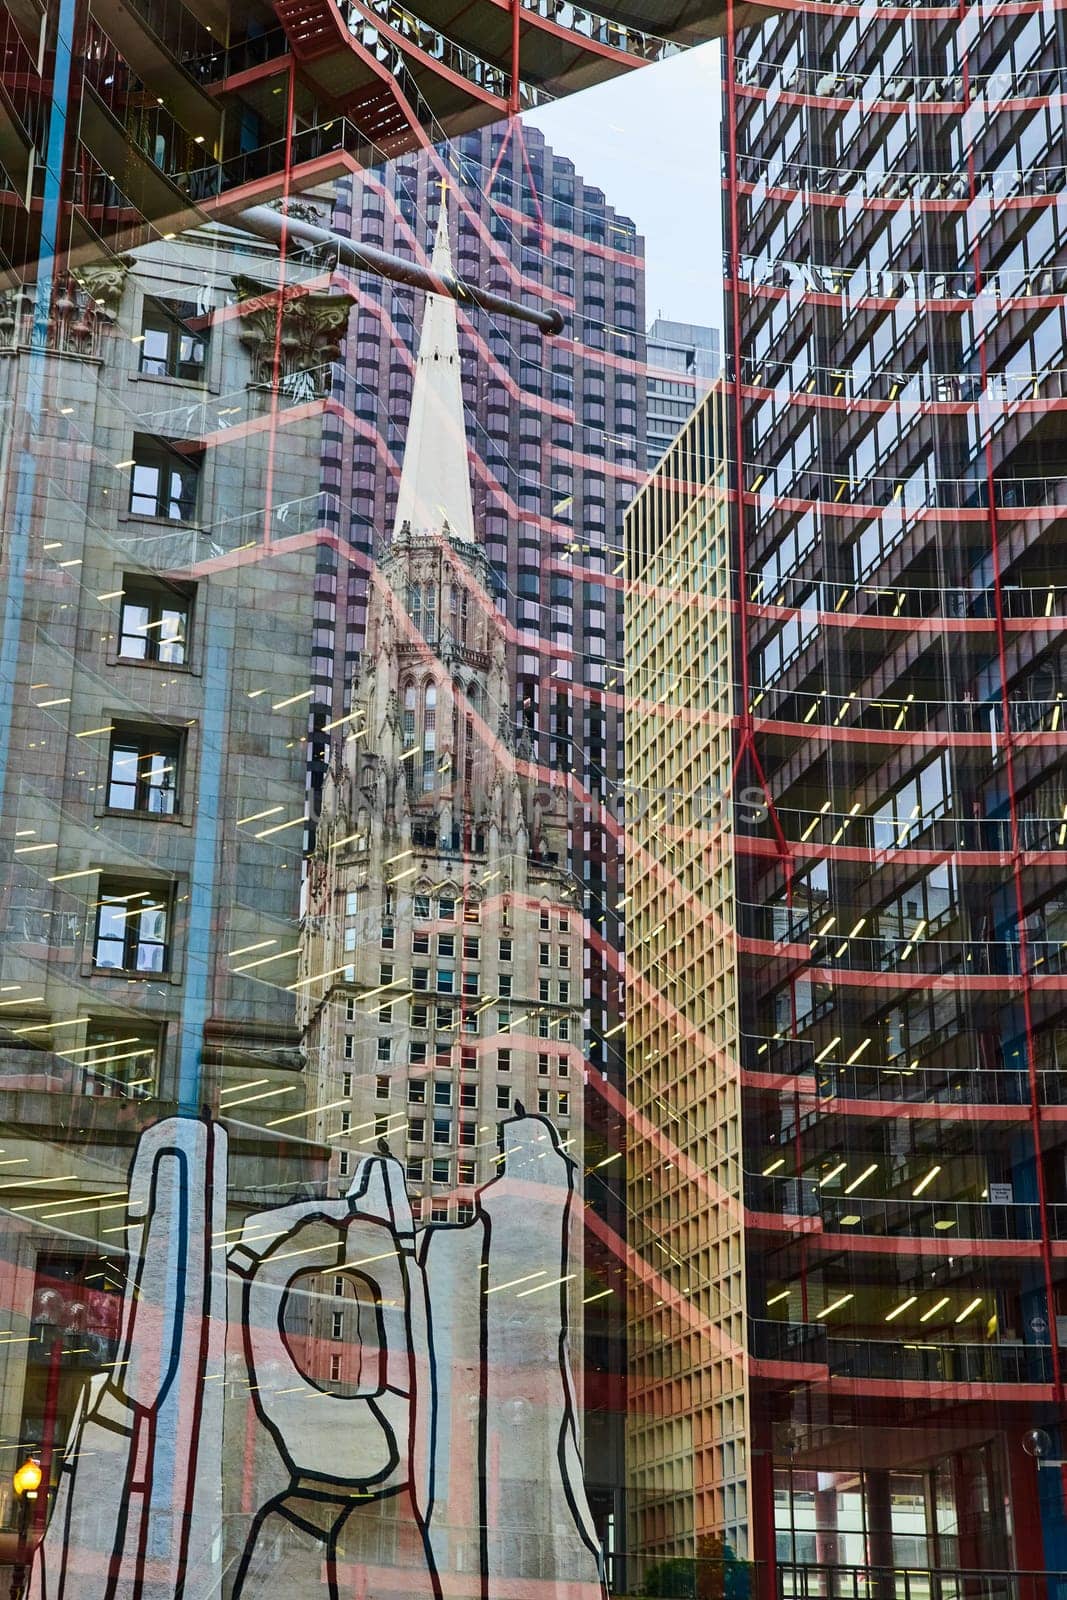 Reflection of interior floors of building with city skyscrapers, Chicago, James R Thompson by njproductions